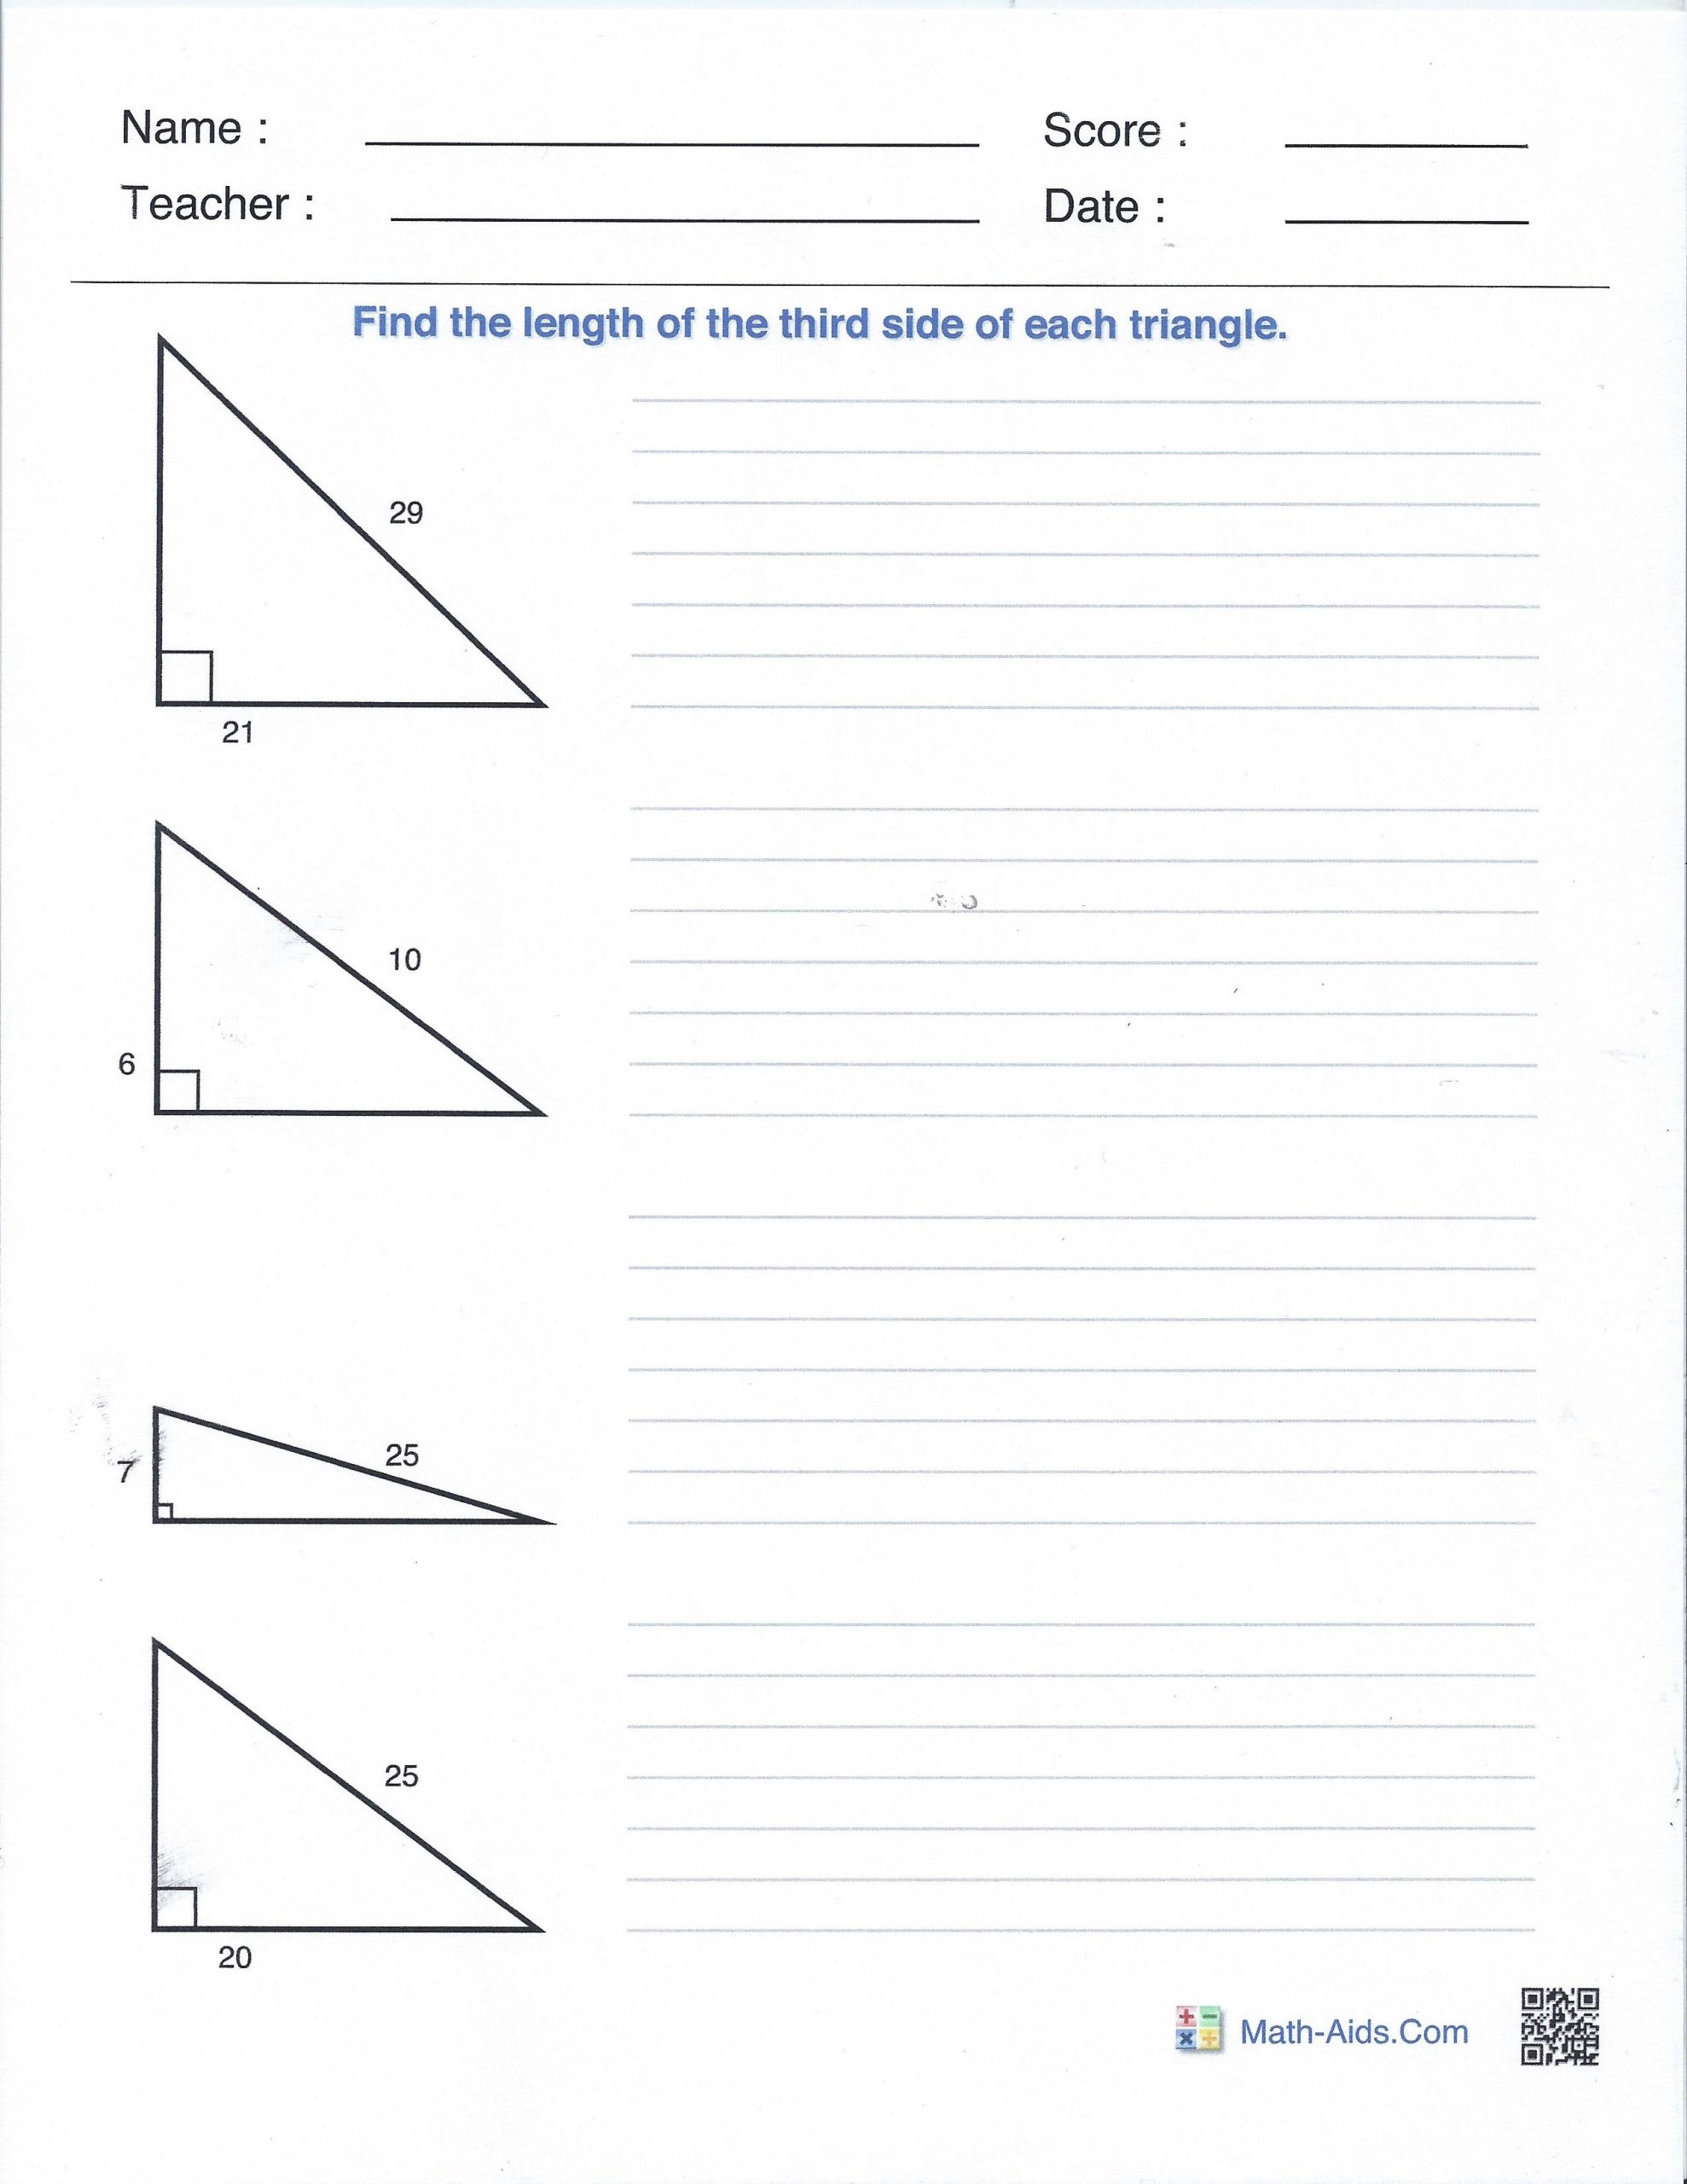 Pythagoras theorem Worksheet with Answers Right Angles and the Pythagorean theorem